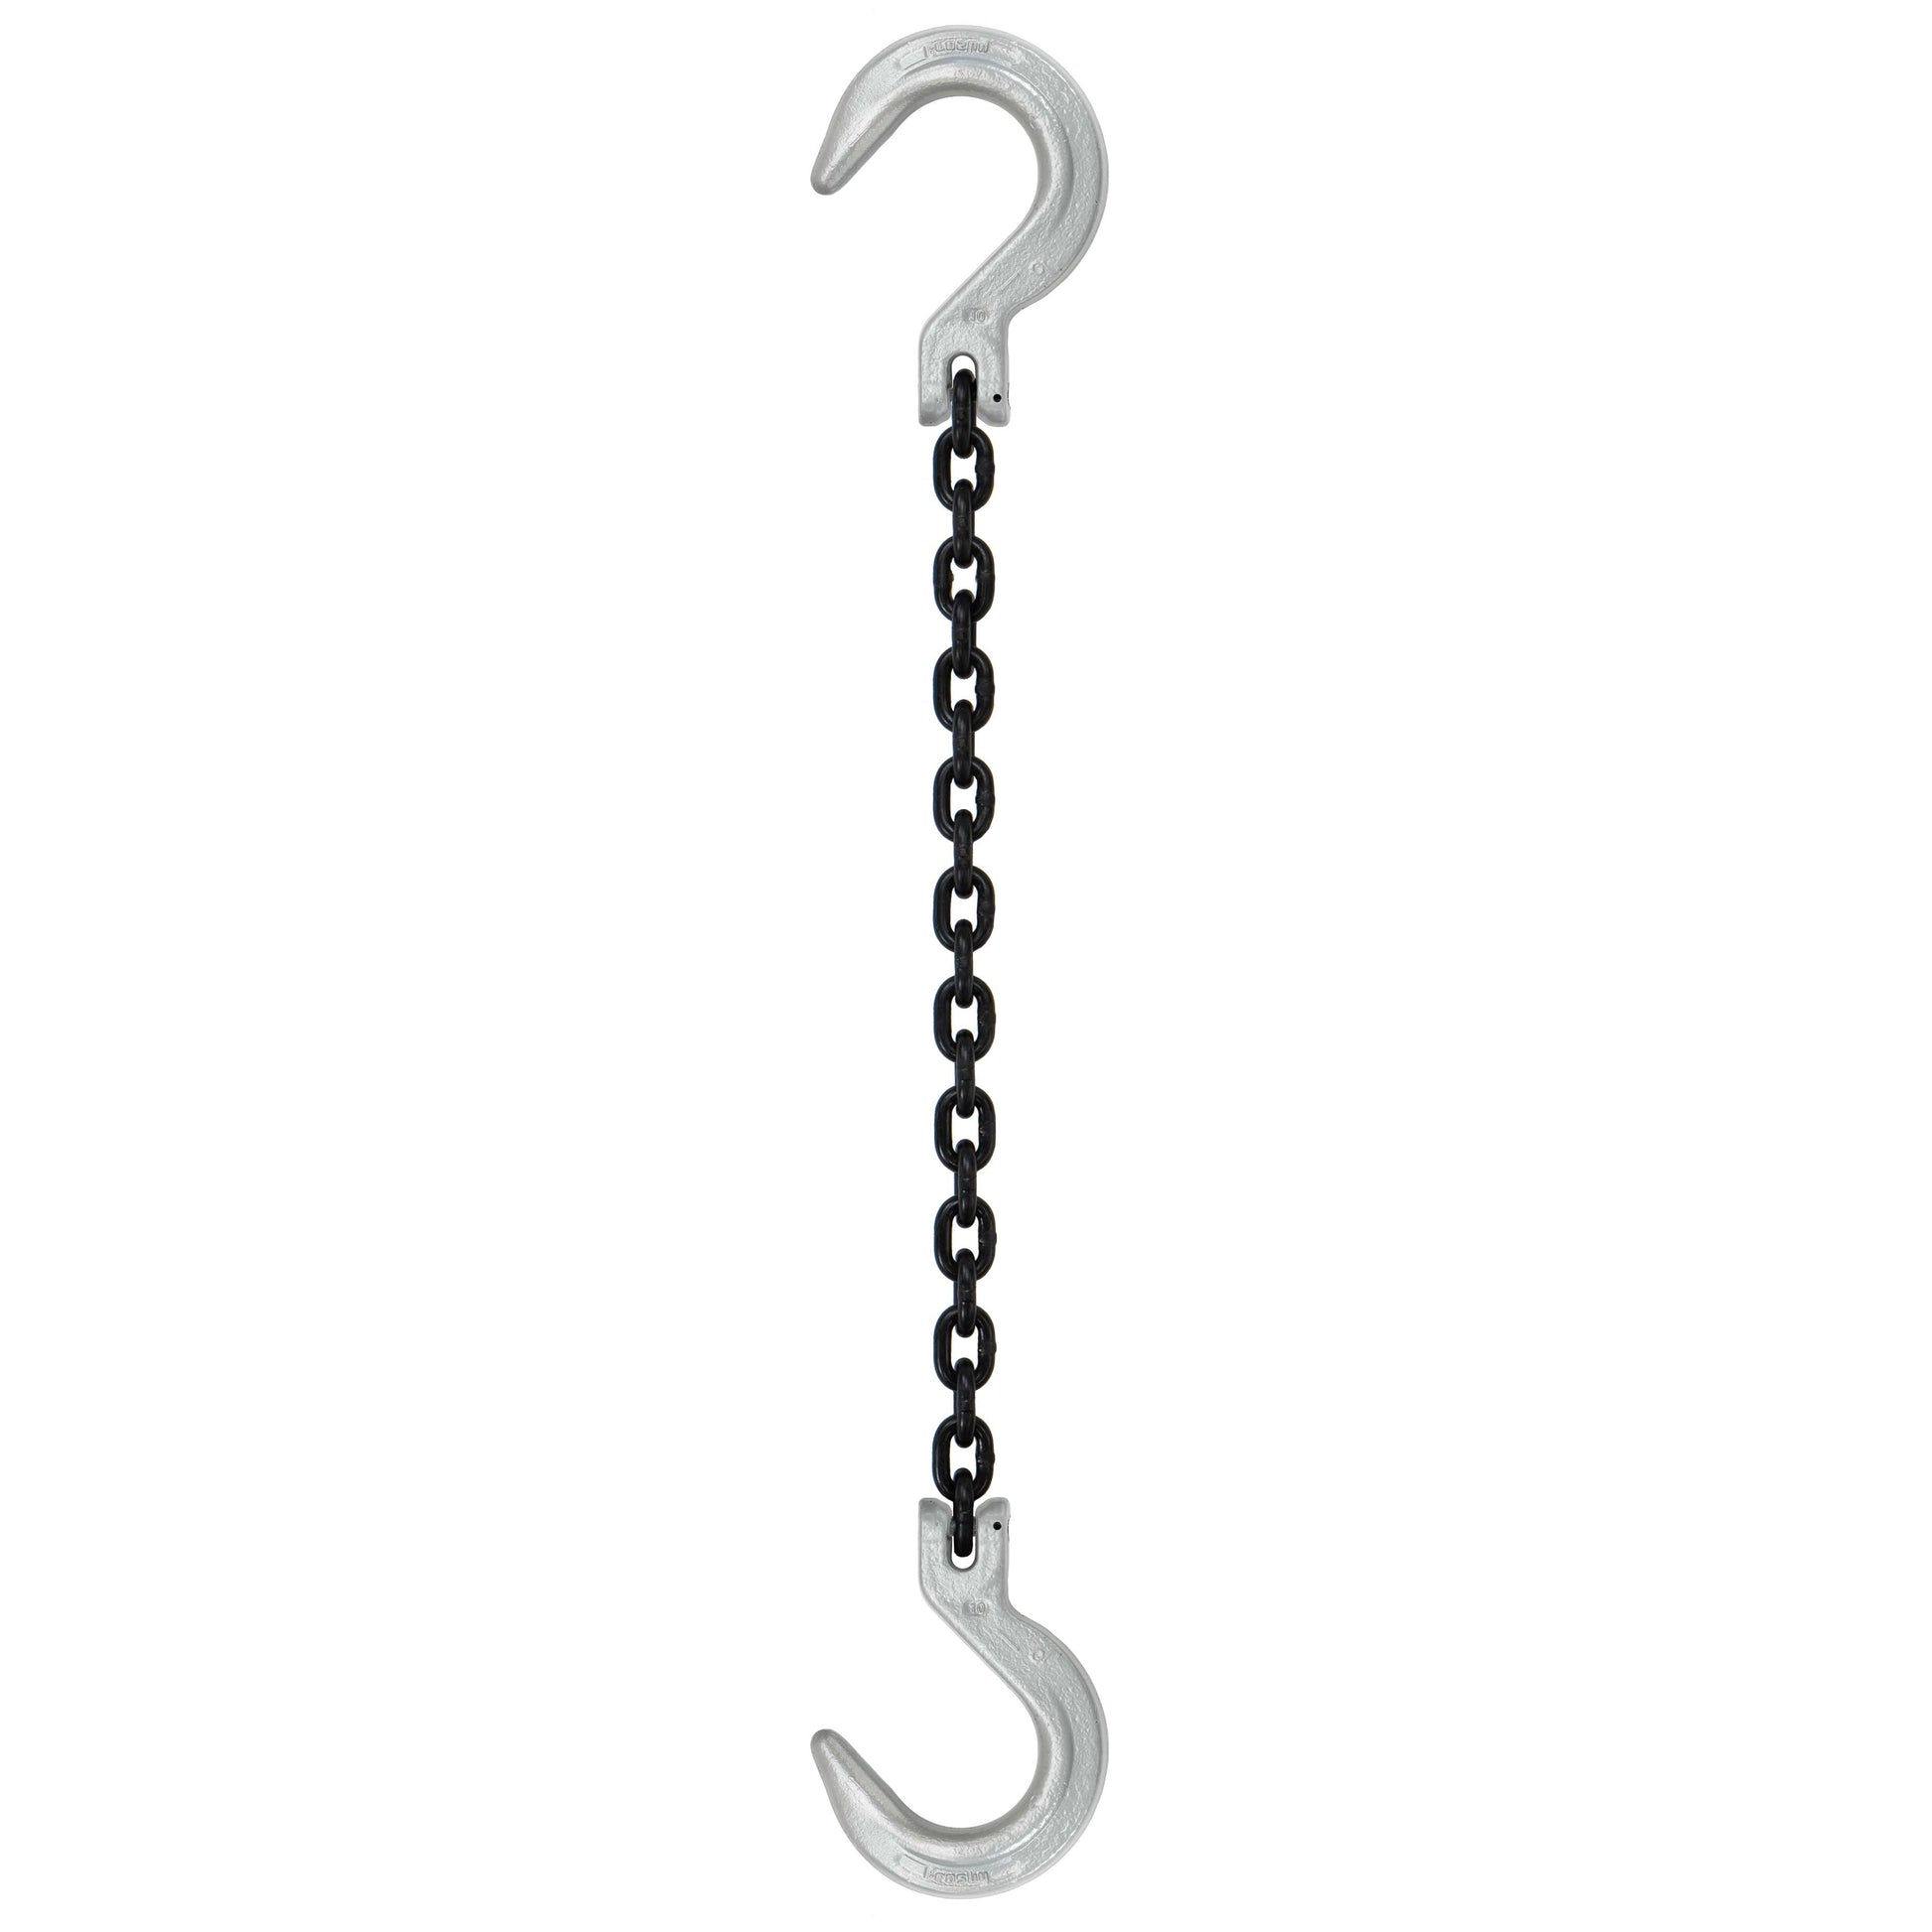 38 inch x 20 foot Domestic Single Leg Chain Sling w Crosby Foundry & Foundry Hooks Grade 100 image 1 of 2